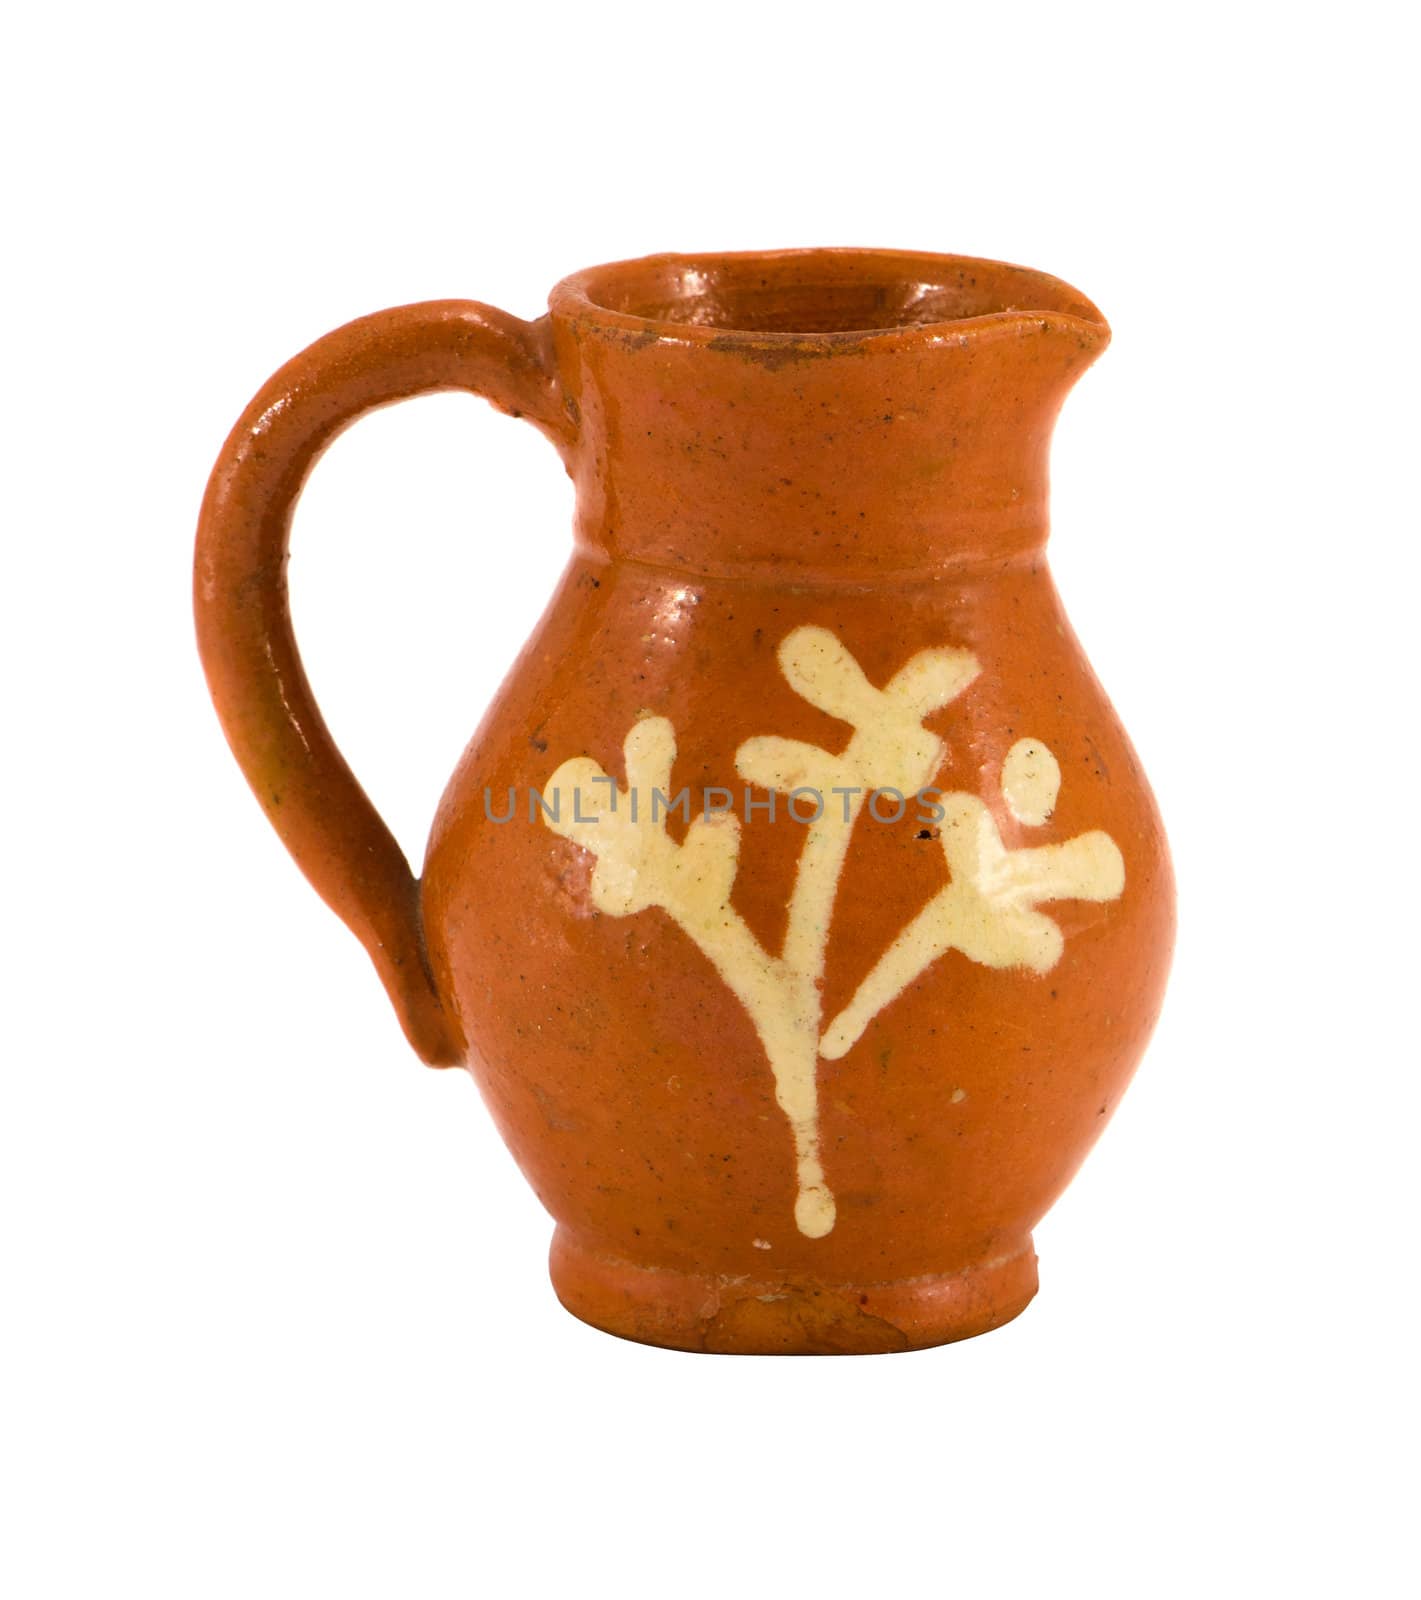 Retro clay pitcher brown color object with handle and ornaments isolated on white background. Home handmade decoration.